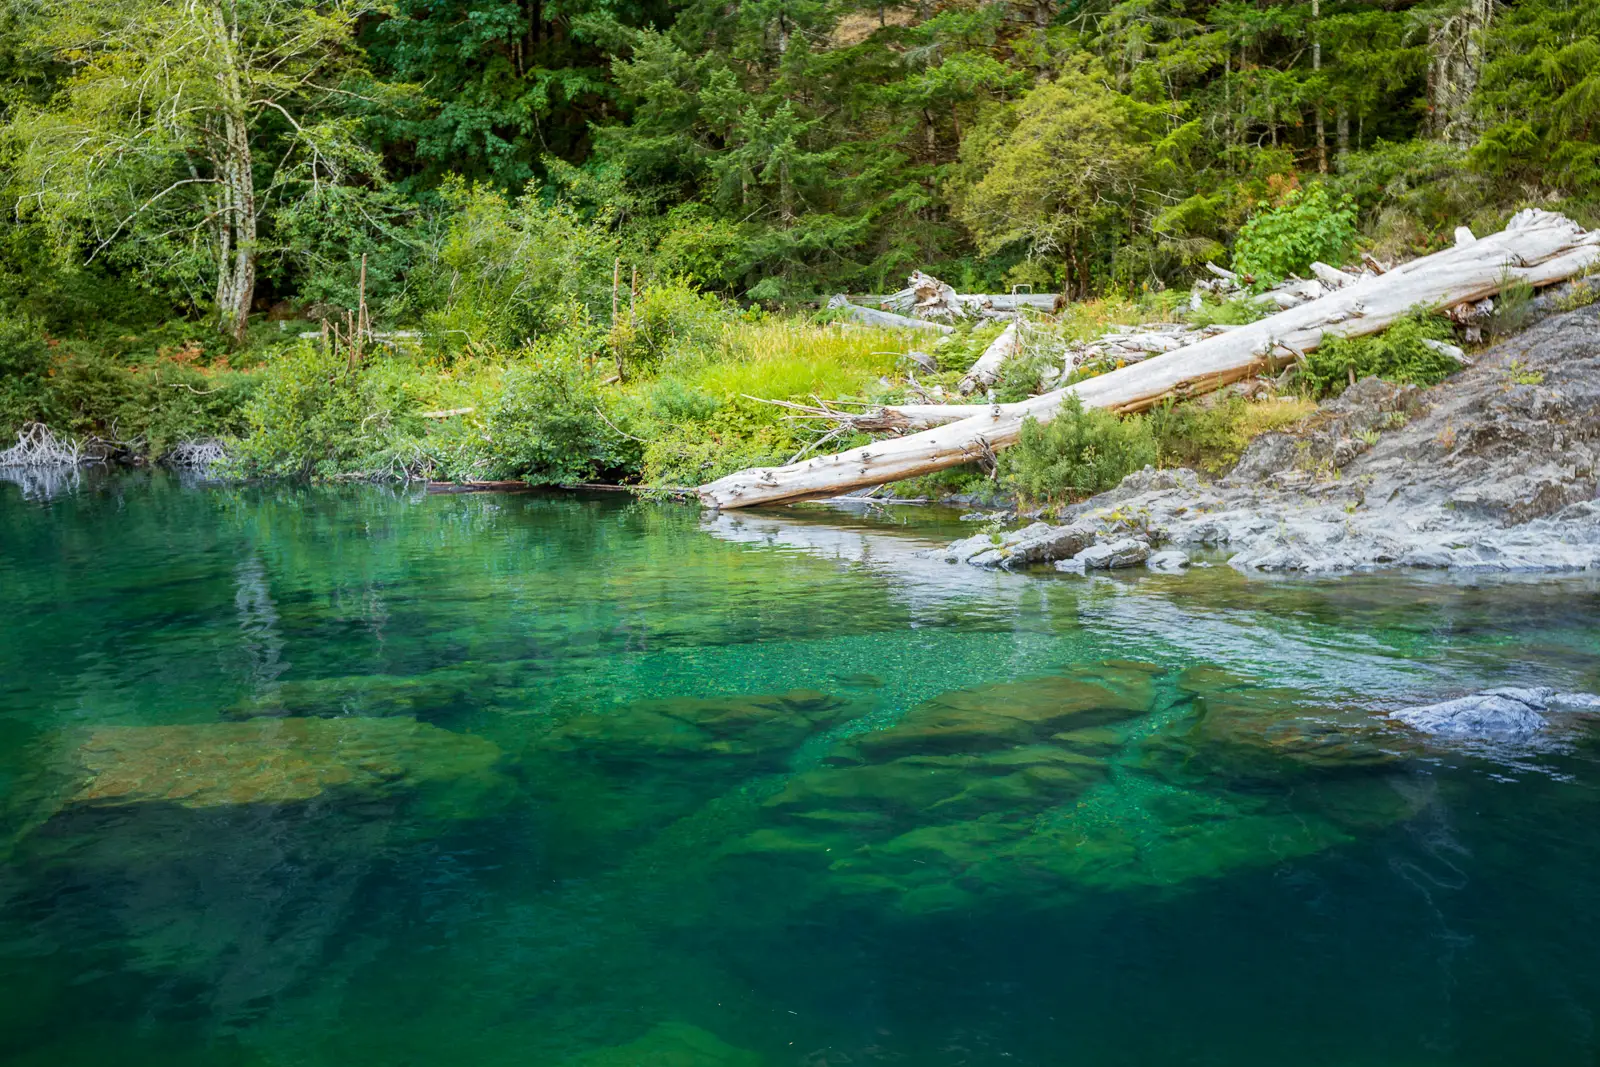 One of the swimming holes at the Sooke Potholes